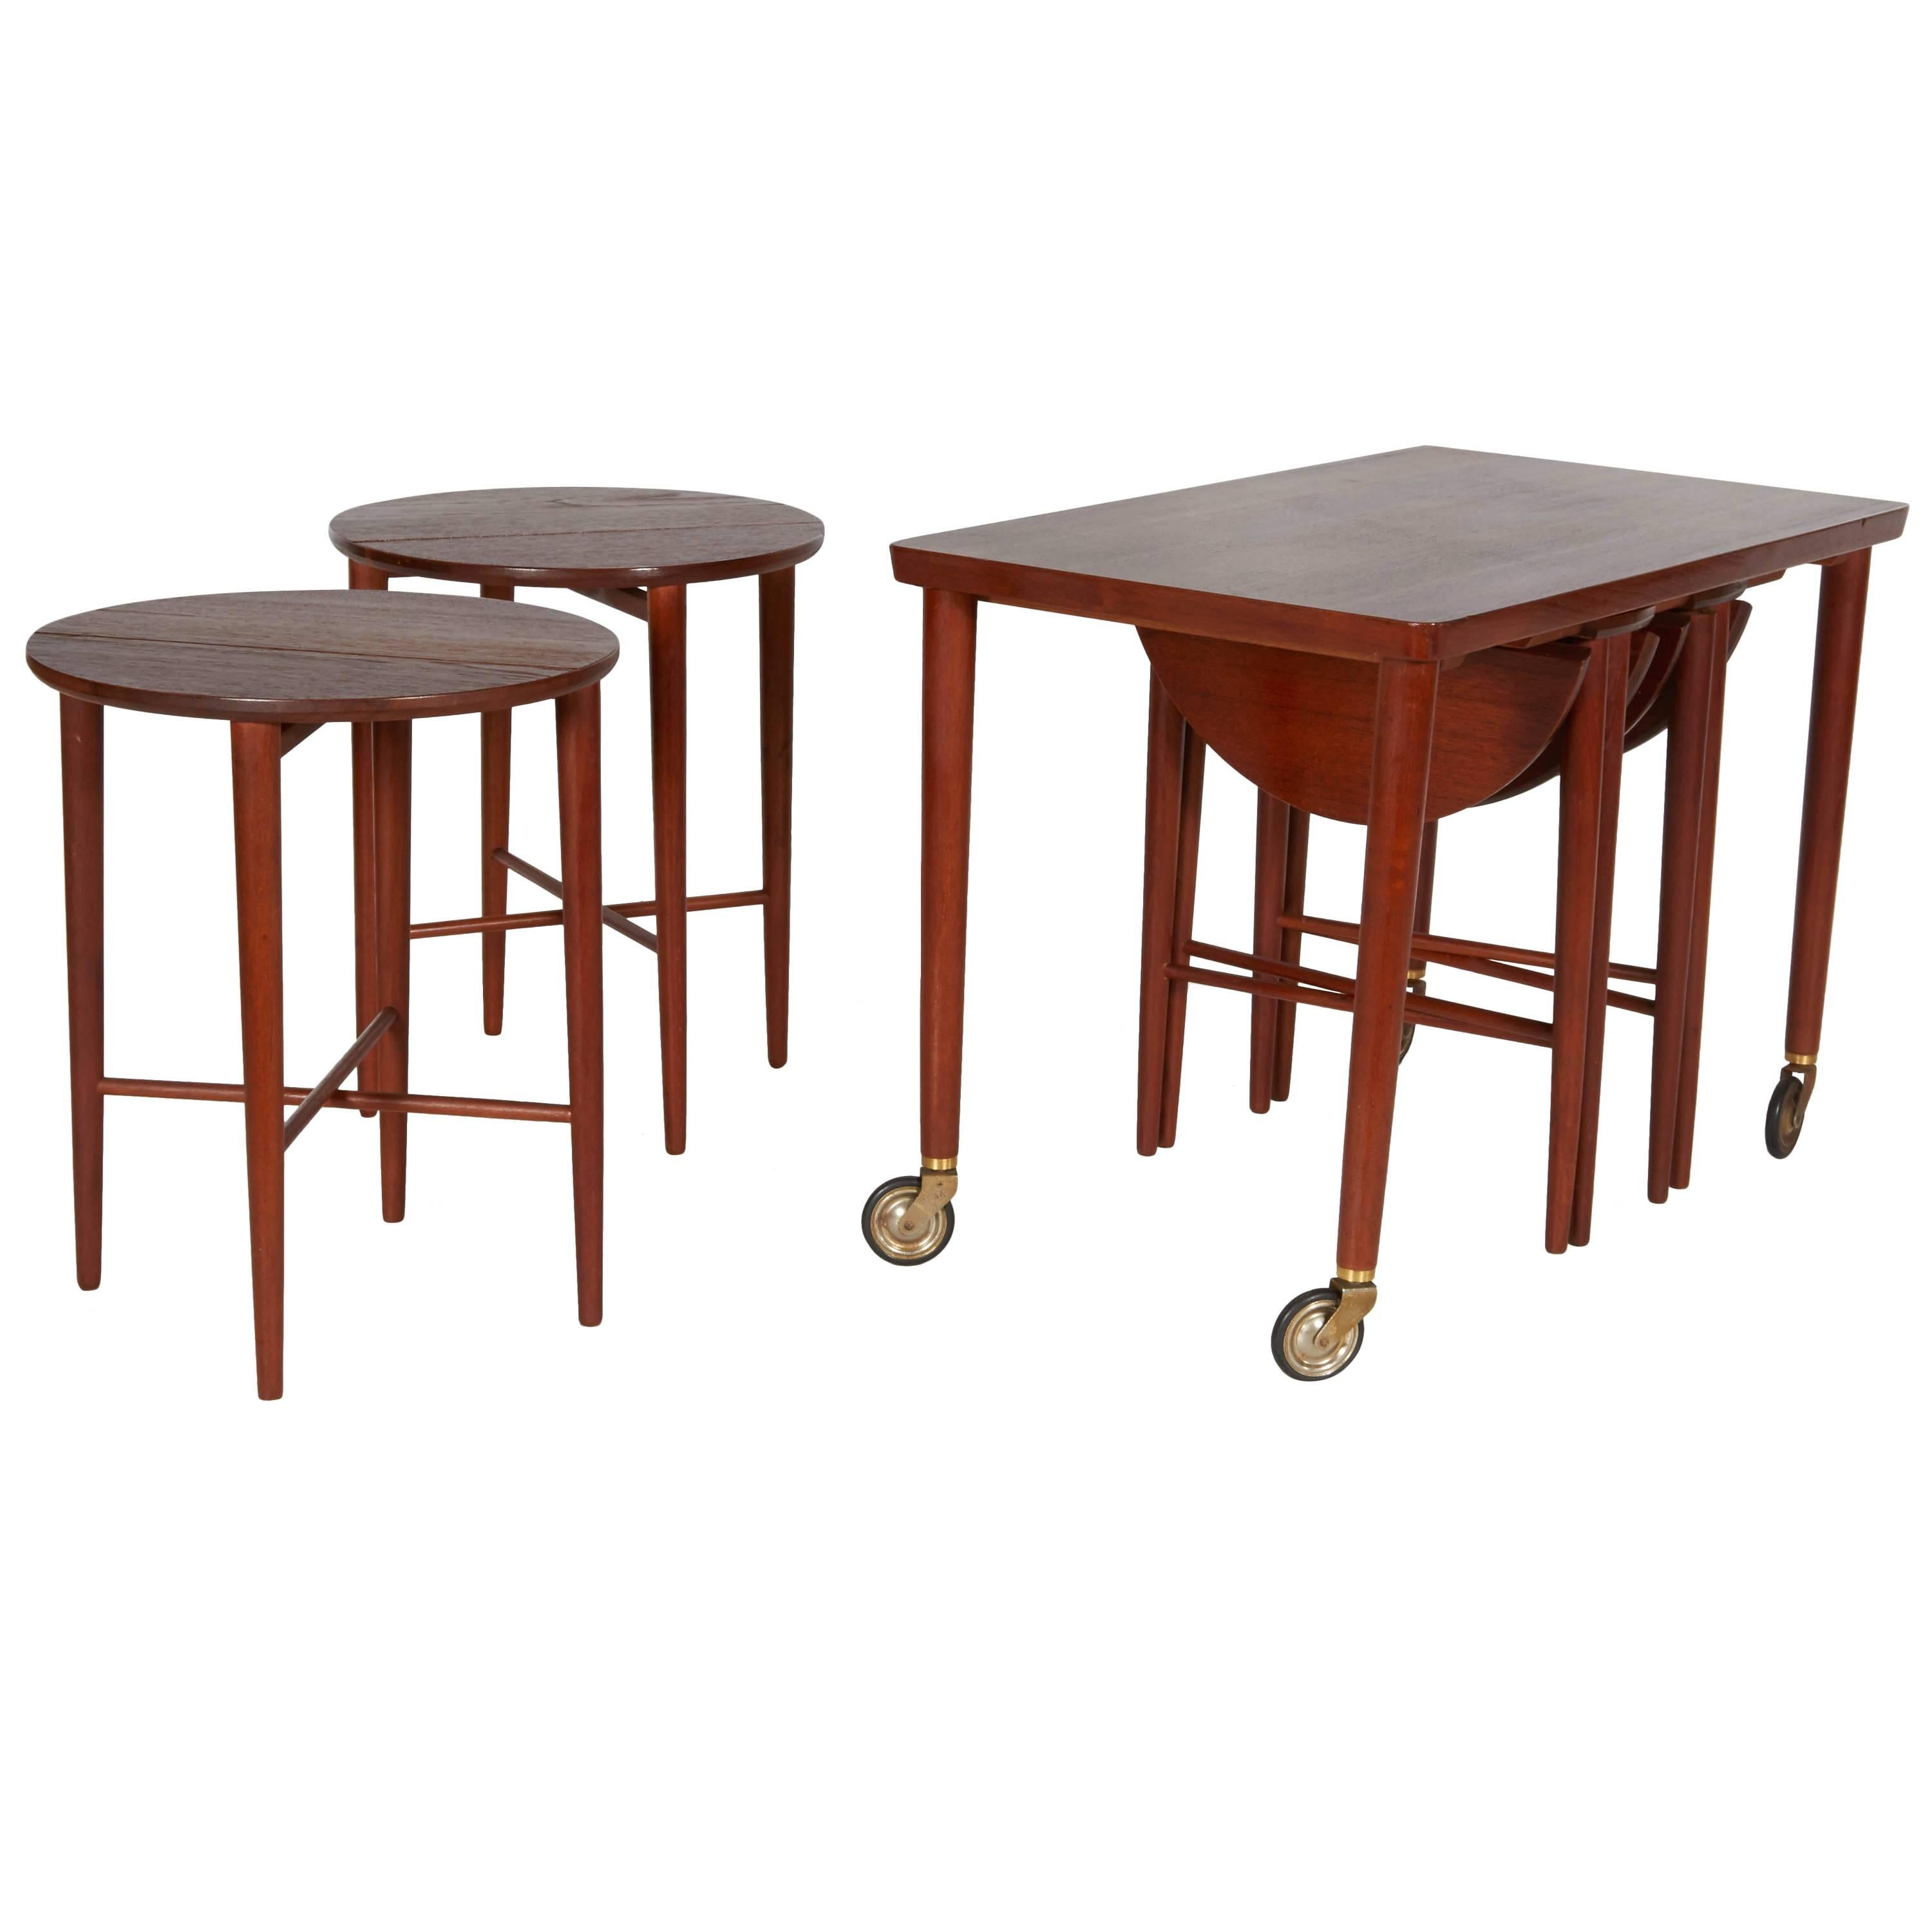 Set of Nesting Tables by Grete Jalk